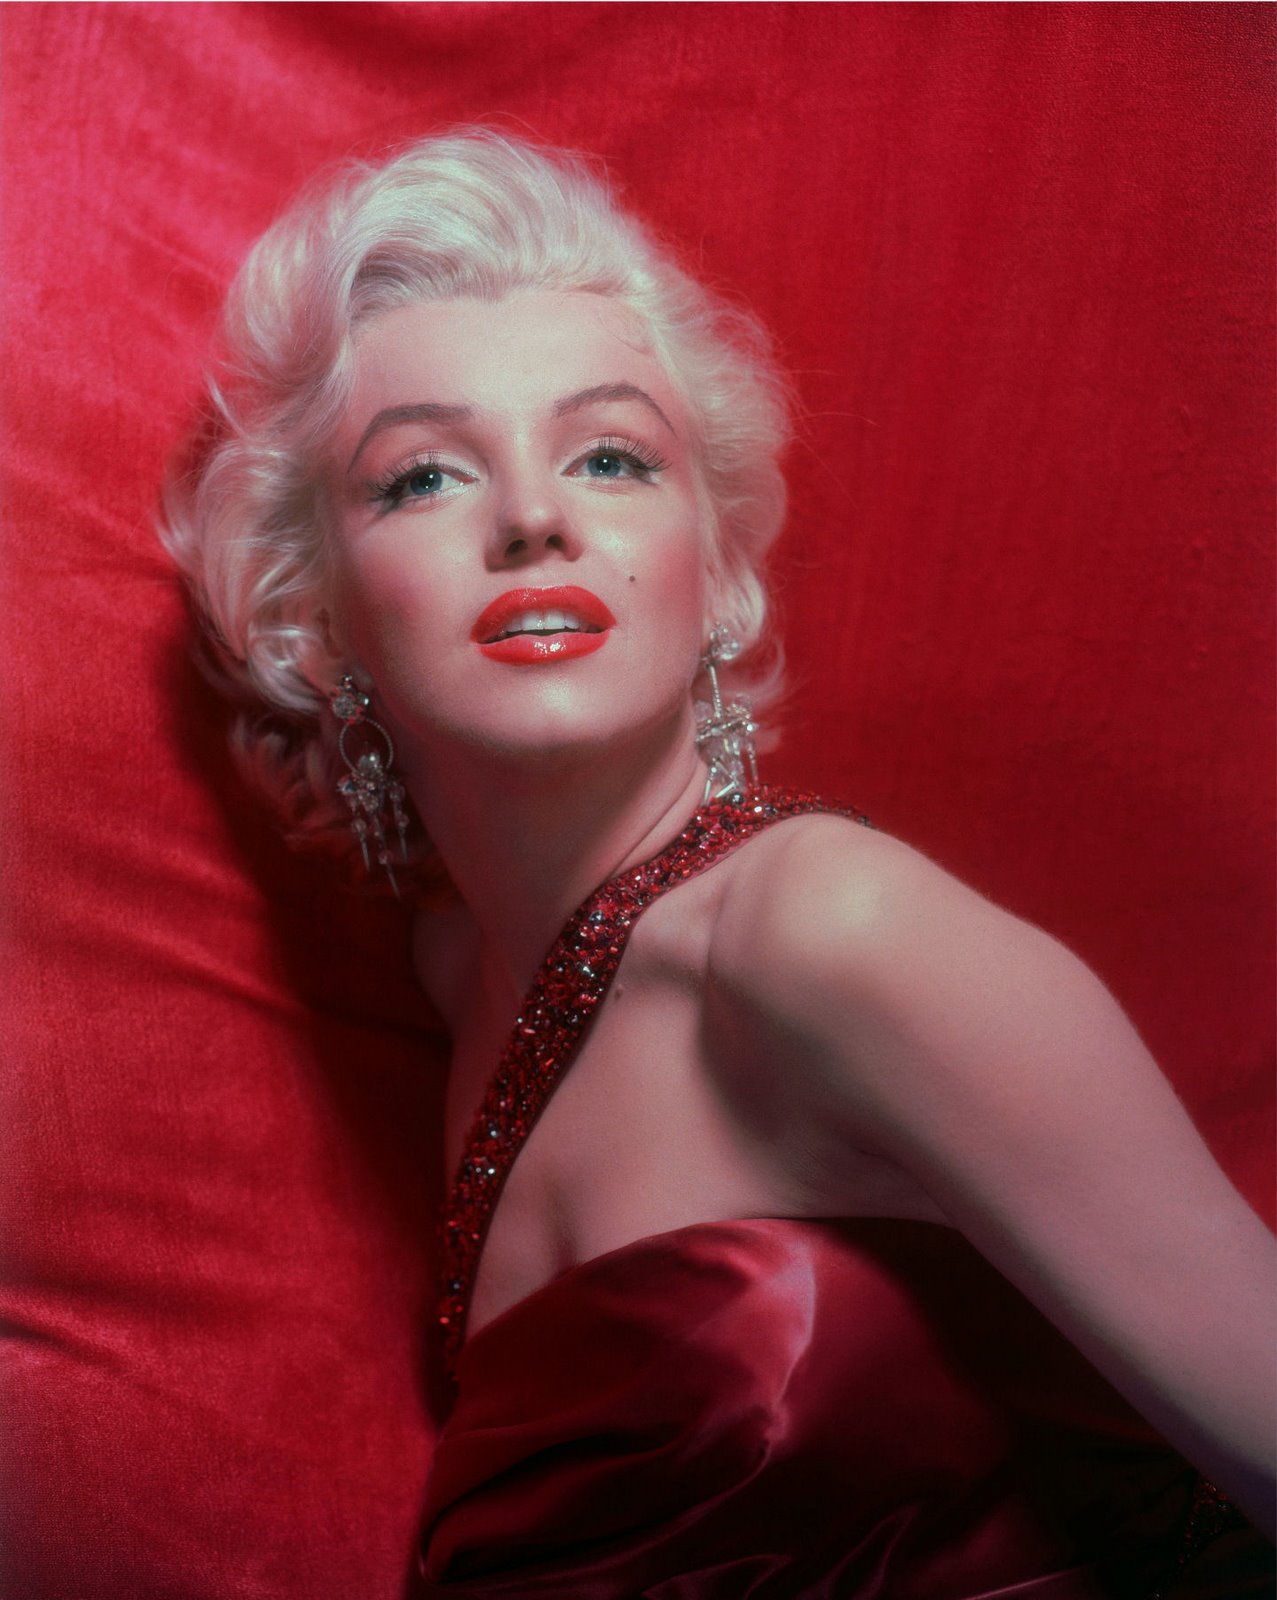 [Monroe,+Marilyn+[060]a+how+to+marry+a+millionaire.jpg]